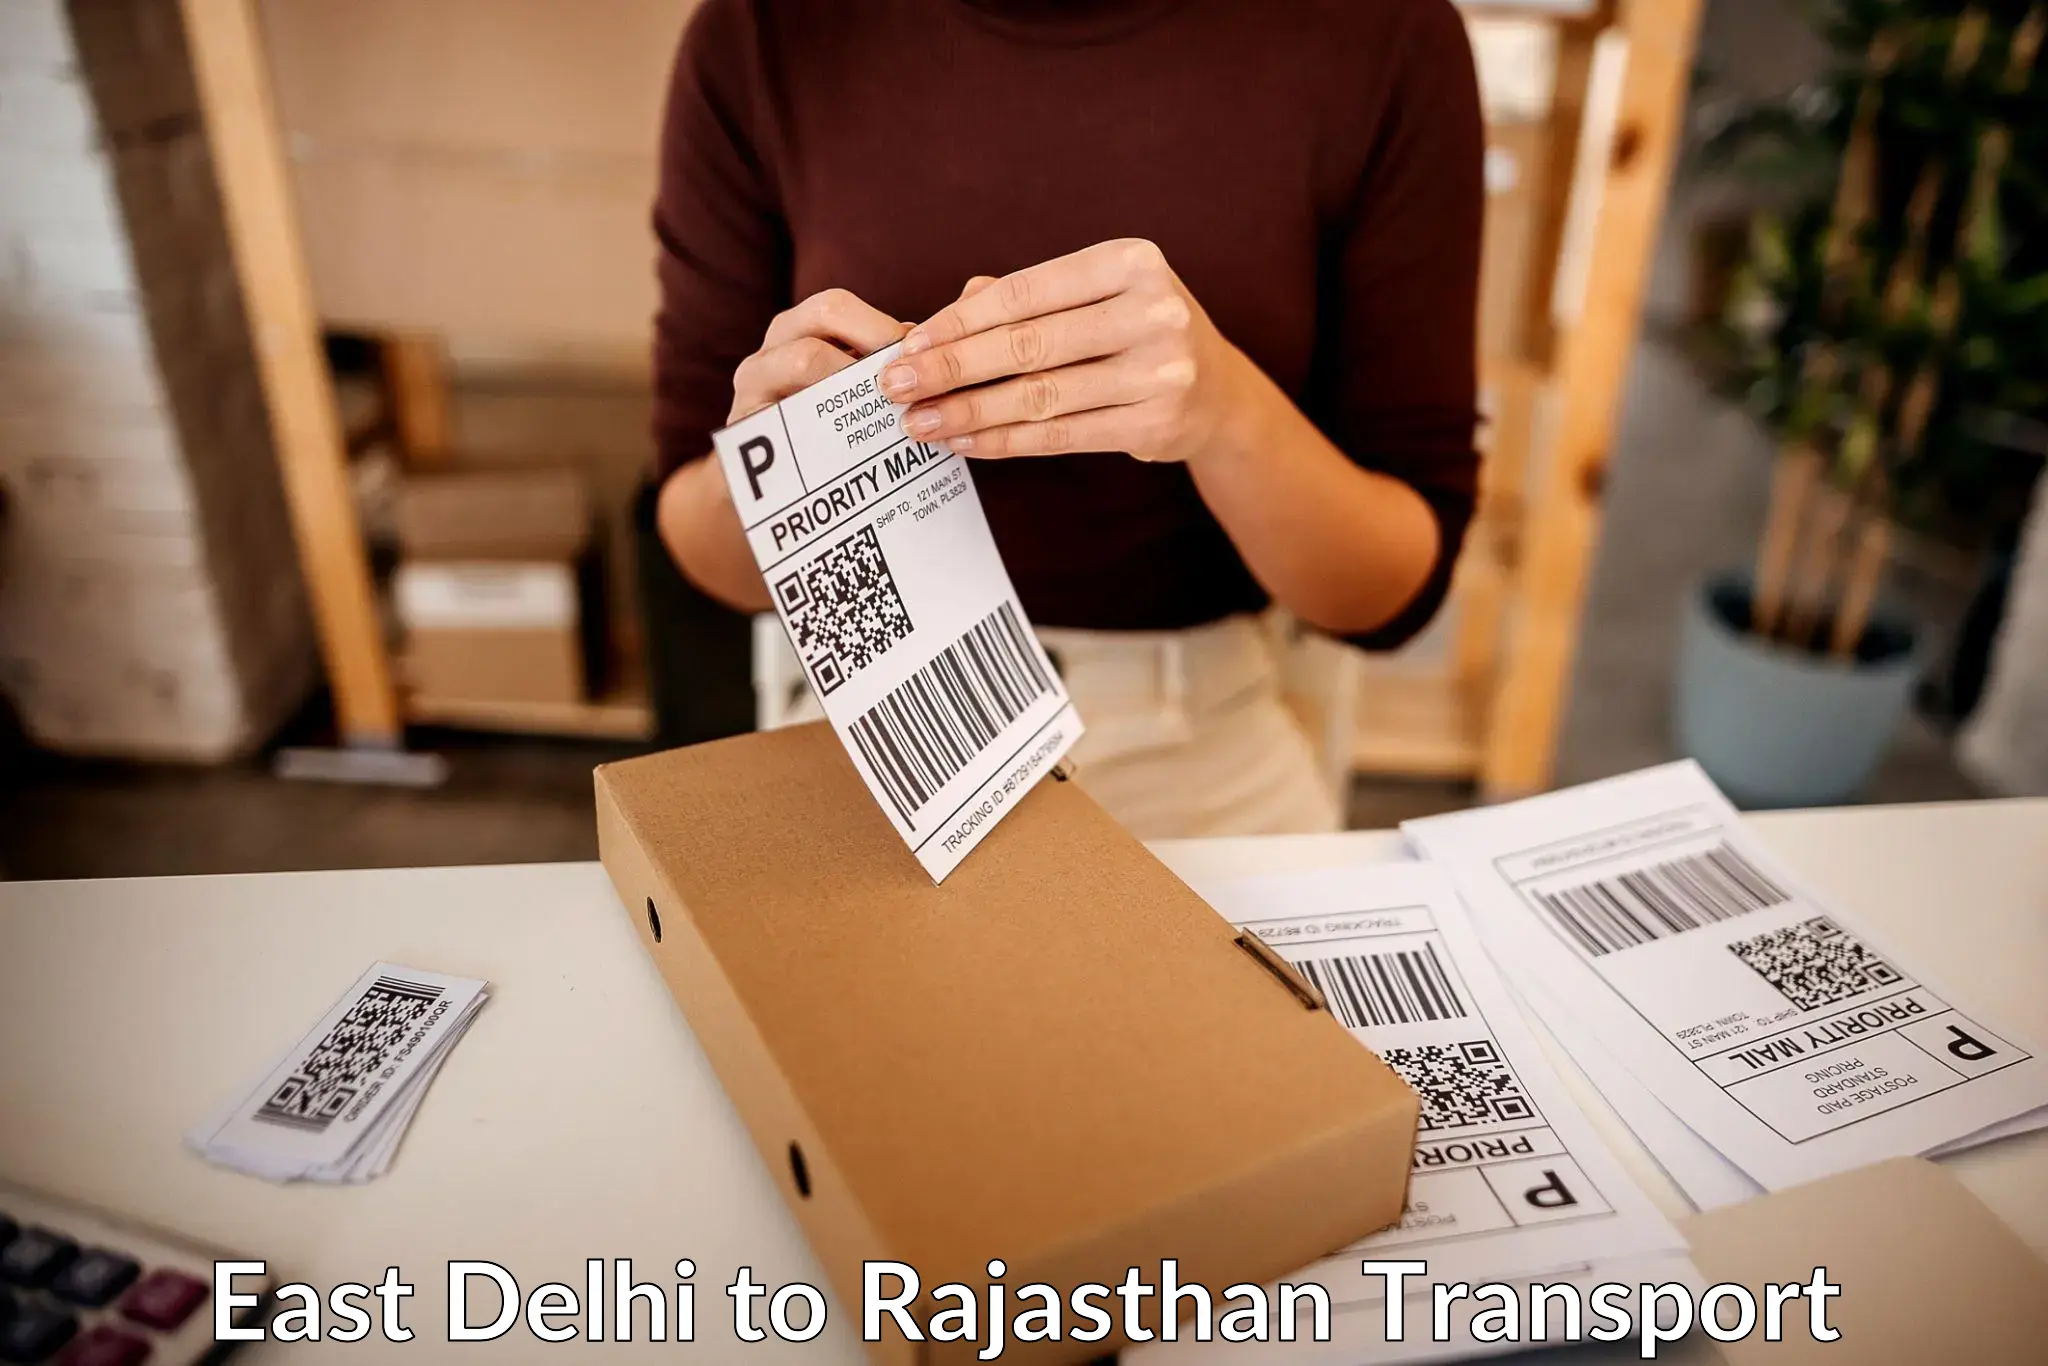 Goods delivery service East Delhi to Nokha